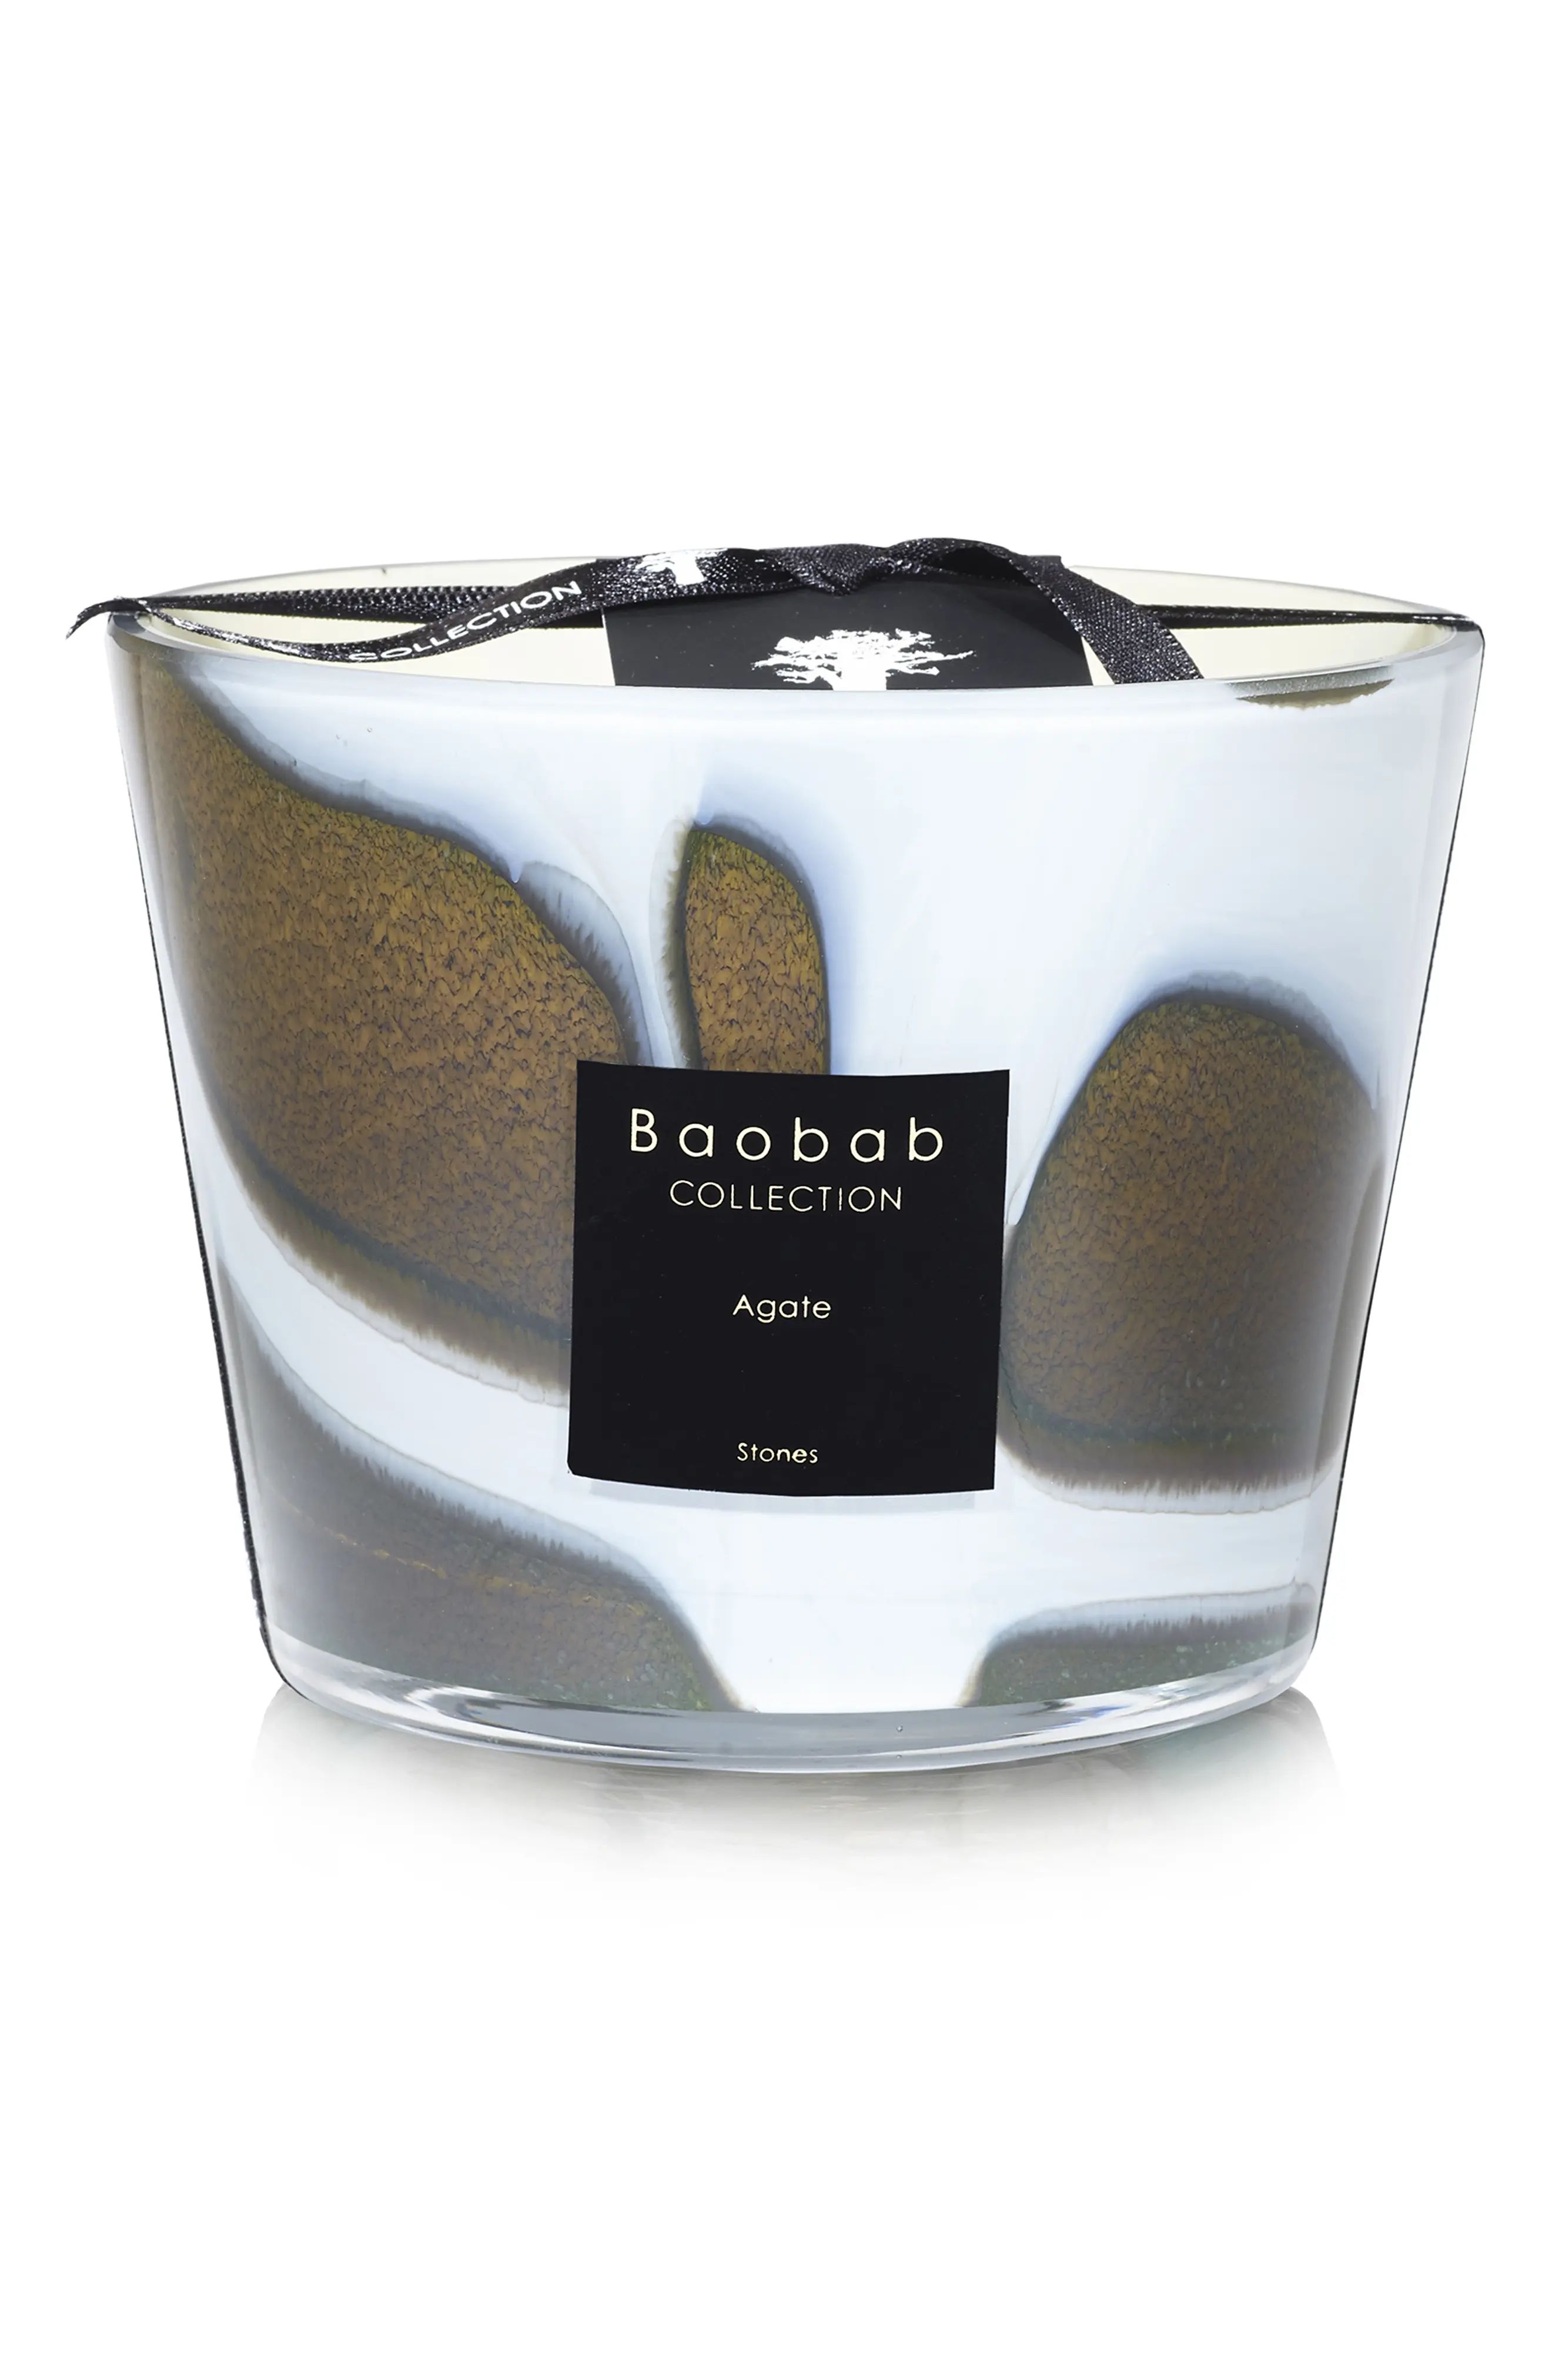 Baobab Collection Stones Agate Candle, Size One Size - Brown | Nordstrom